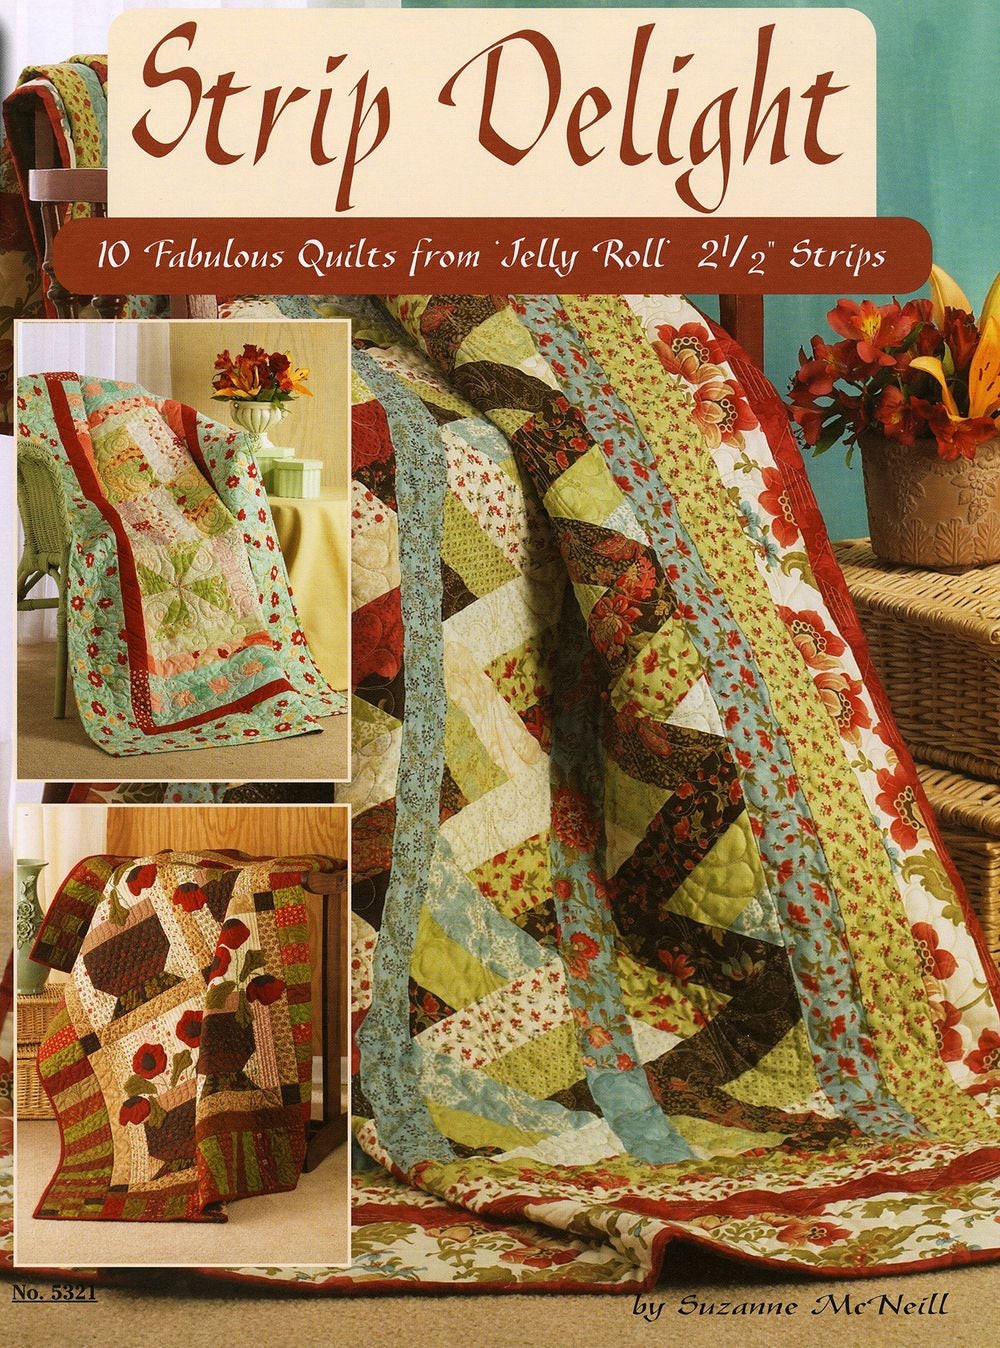 Simply Jelly Rolls Quilt Book by It's Sew Emma 9798986060637 - Quilt in a  Day Patterns